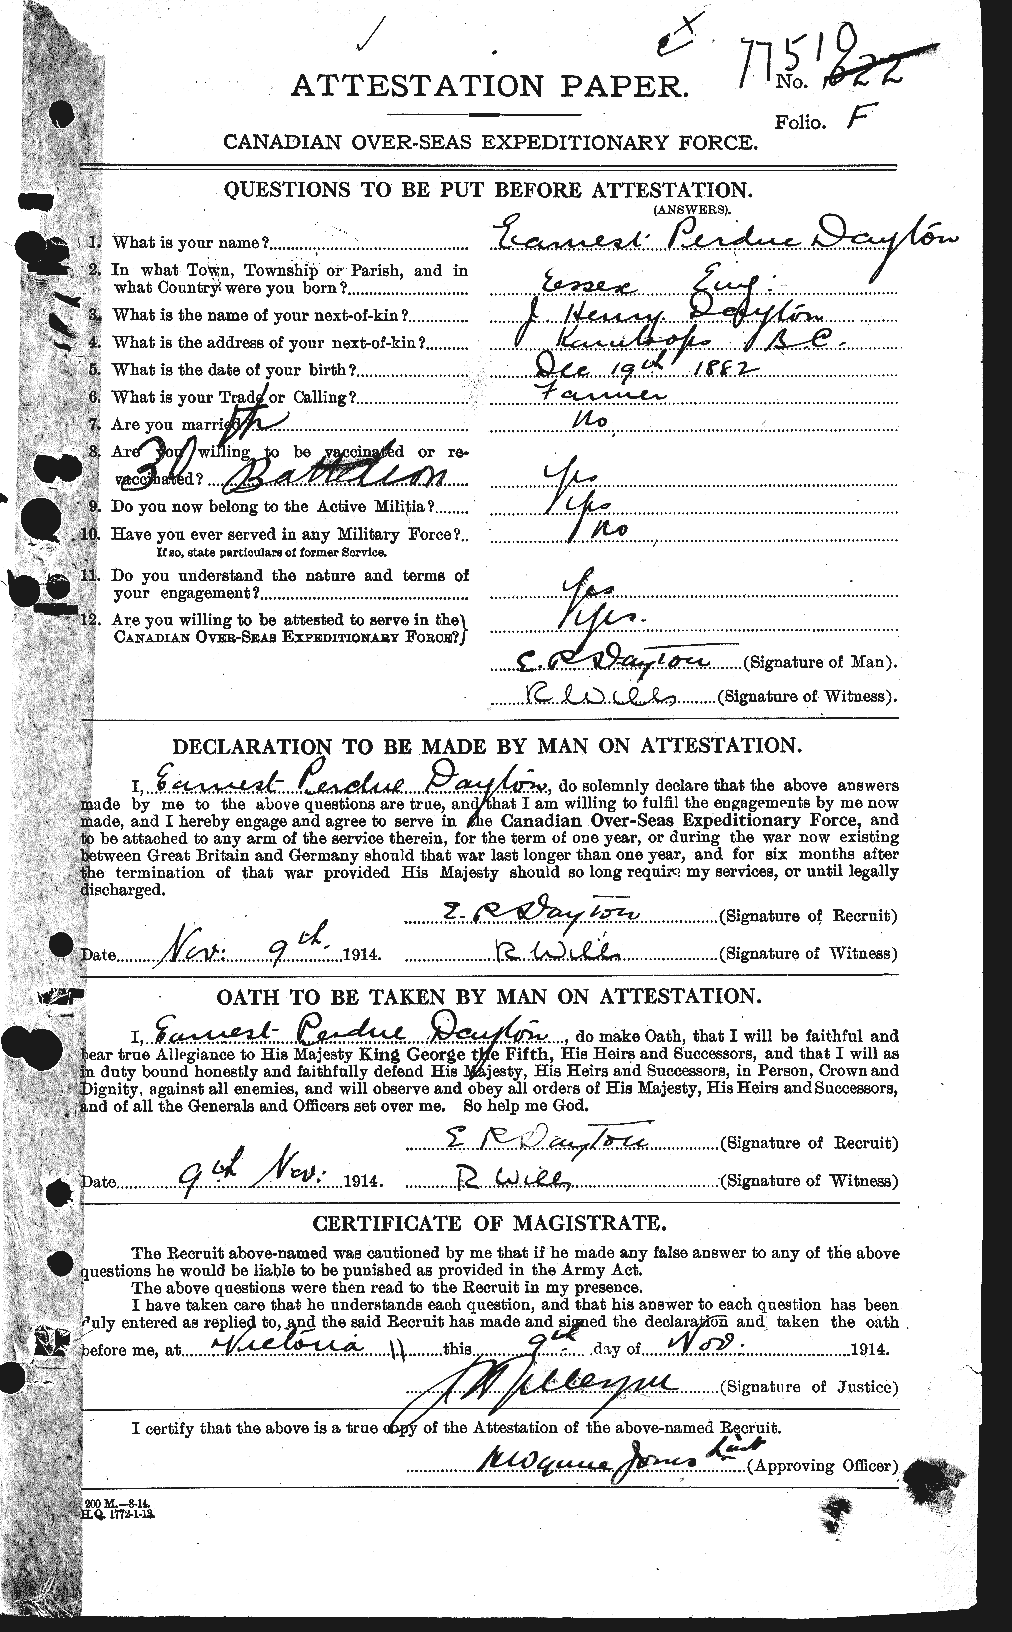 Personnel Records of the First World War - CEF 283615a